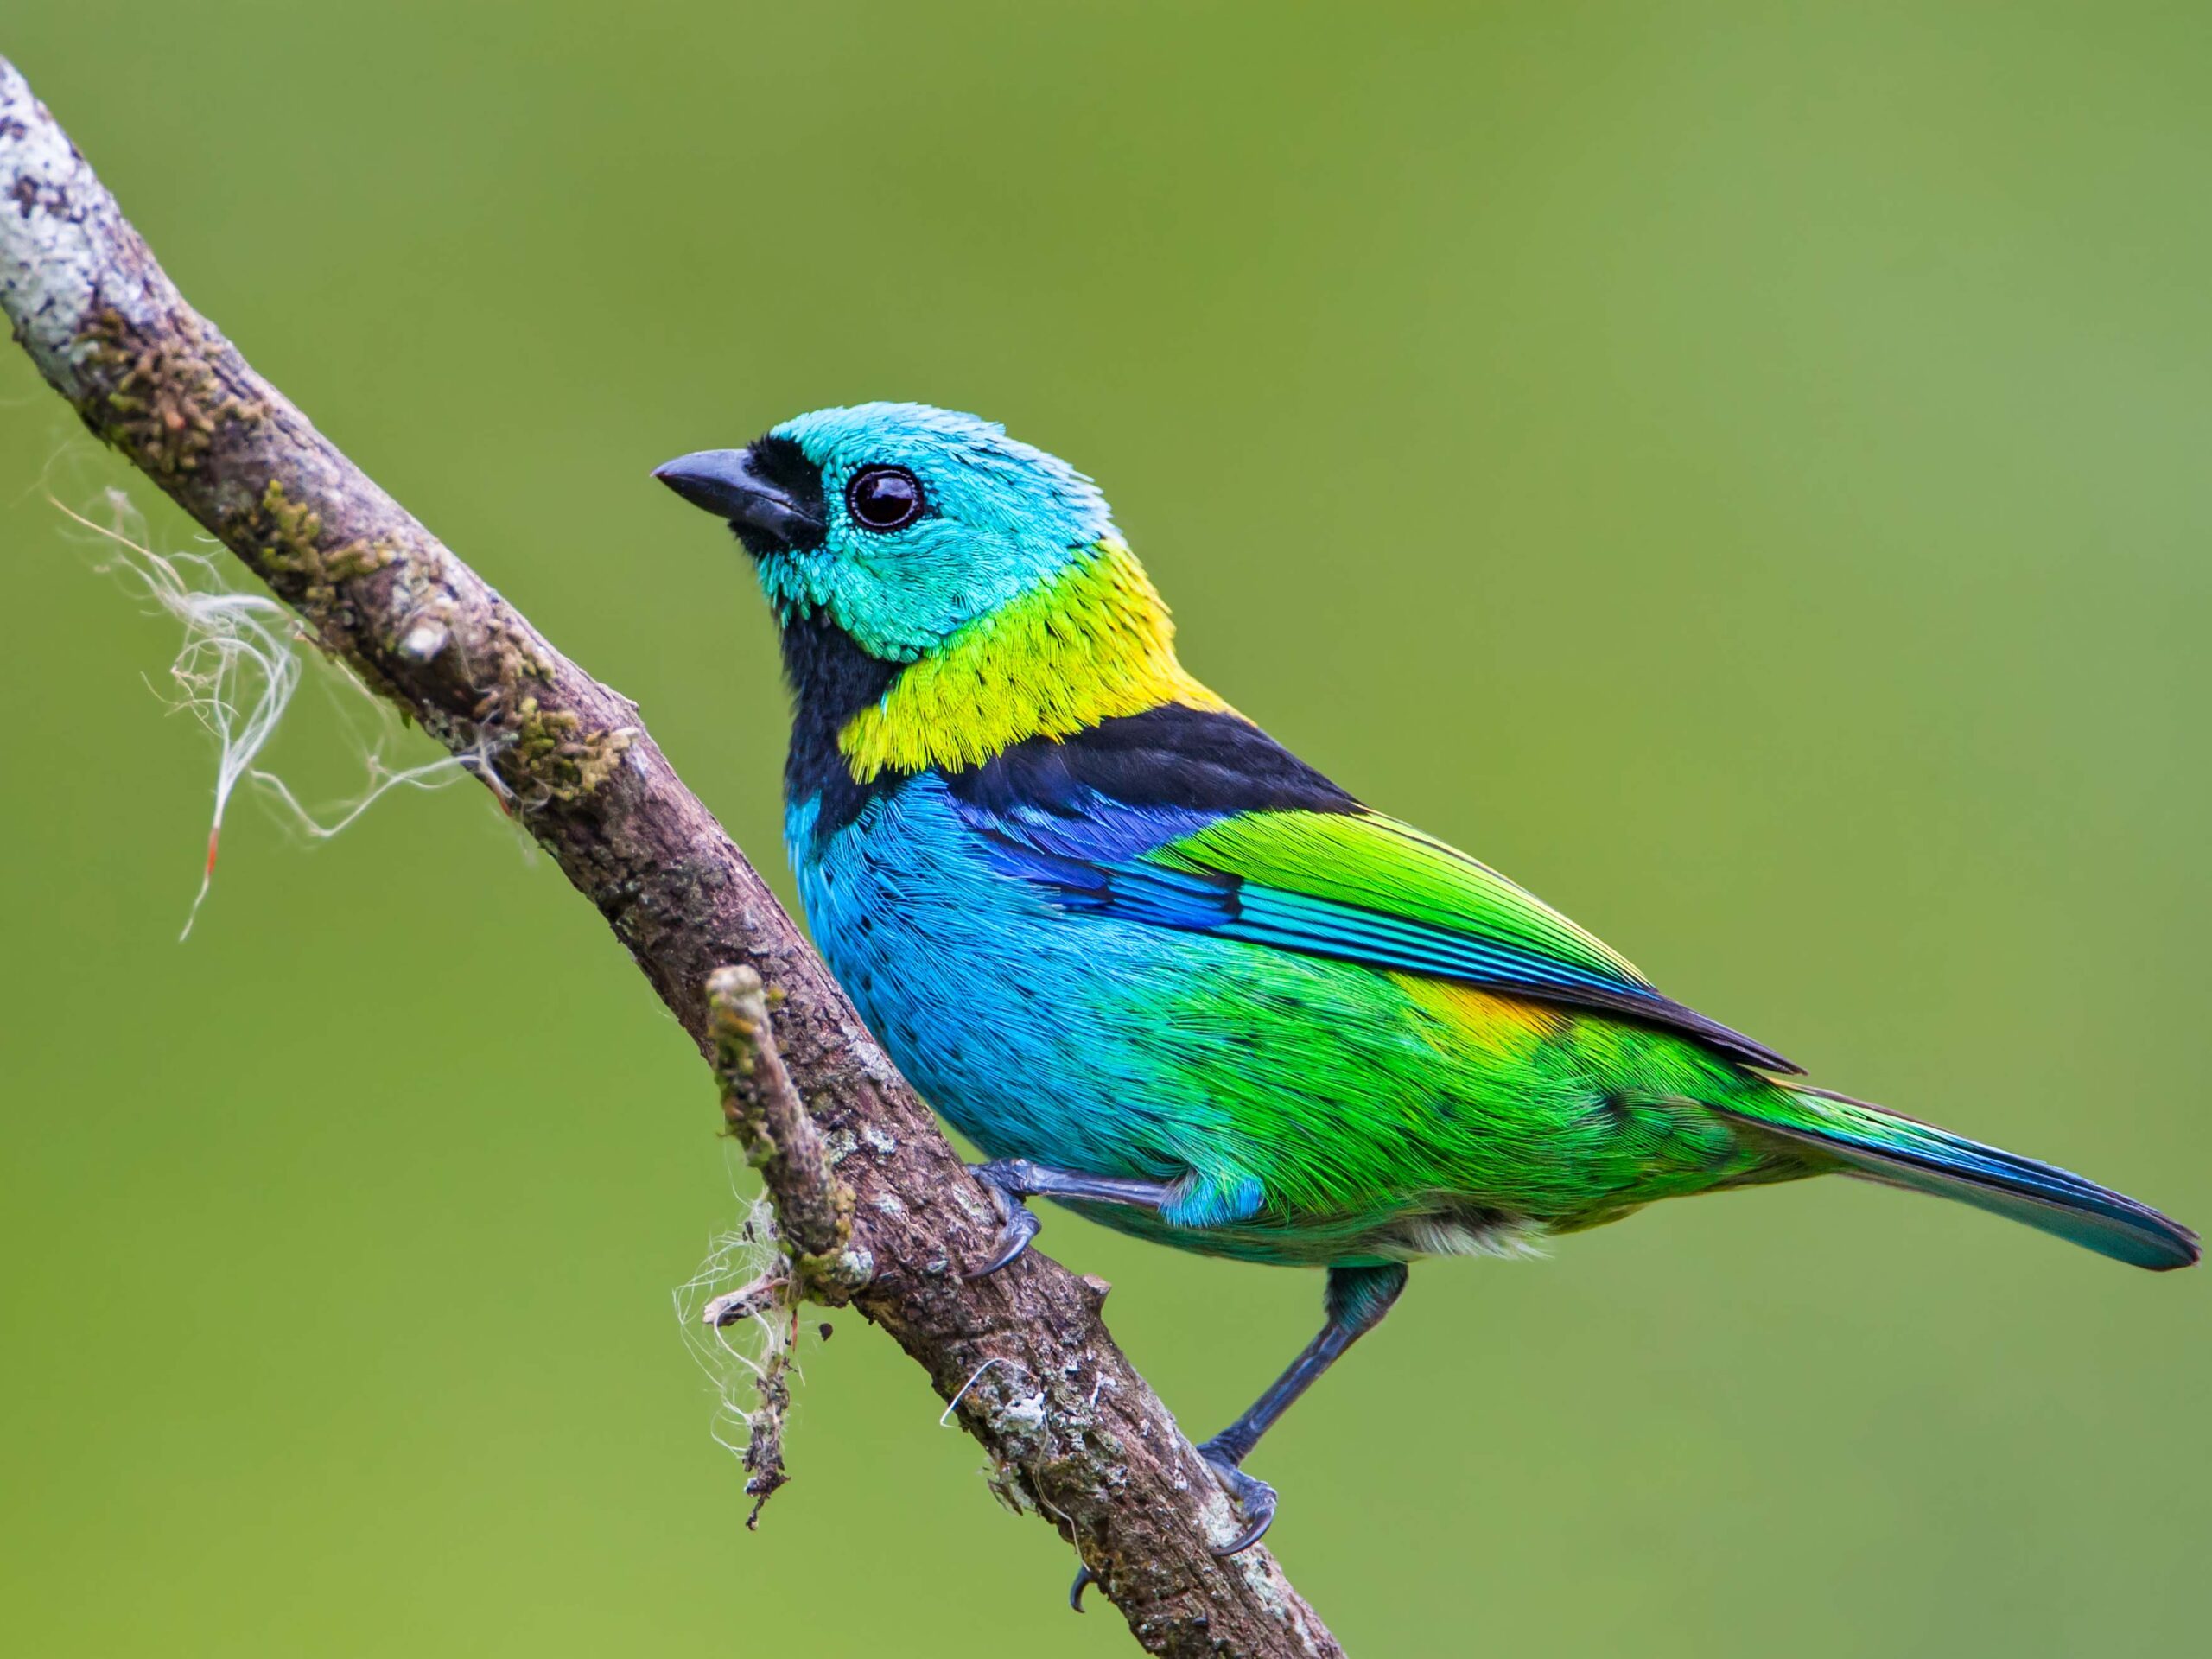 Green-headed-tanager in the Atlantic Forest